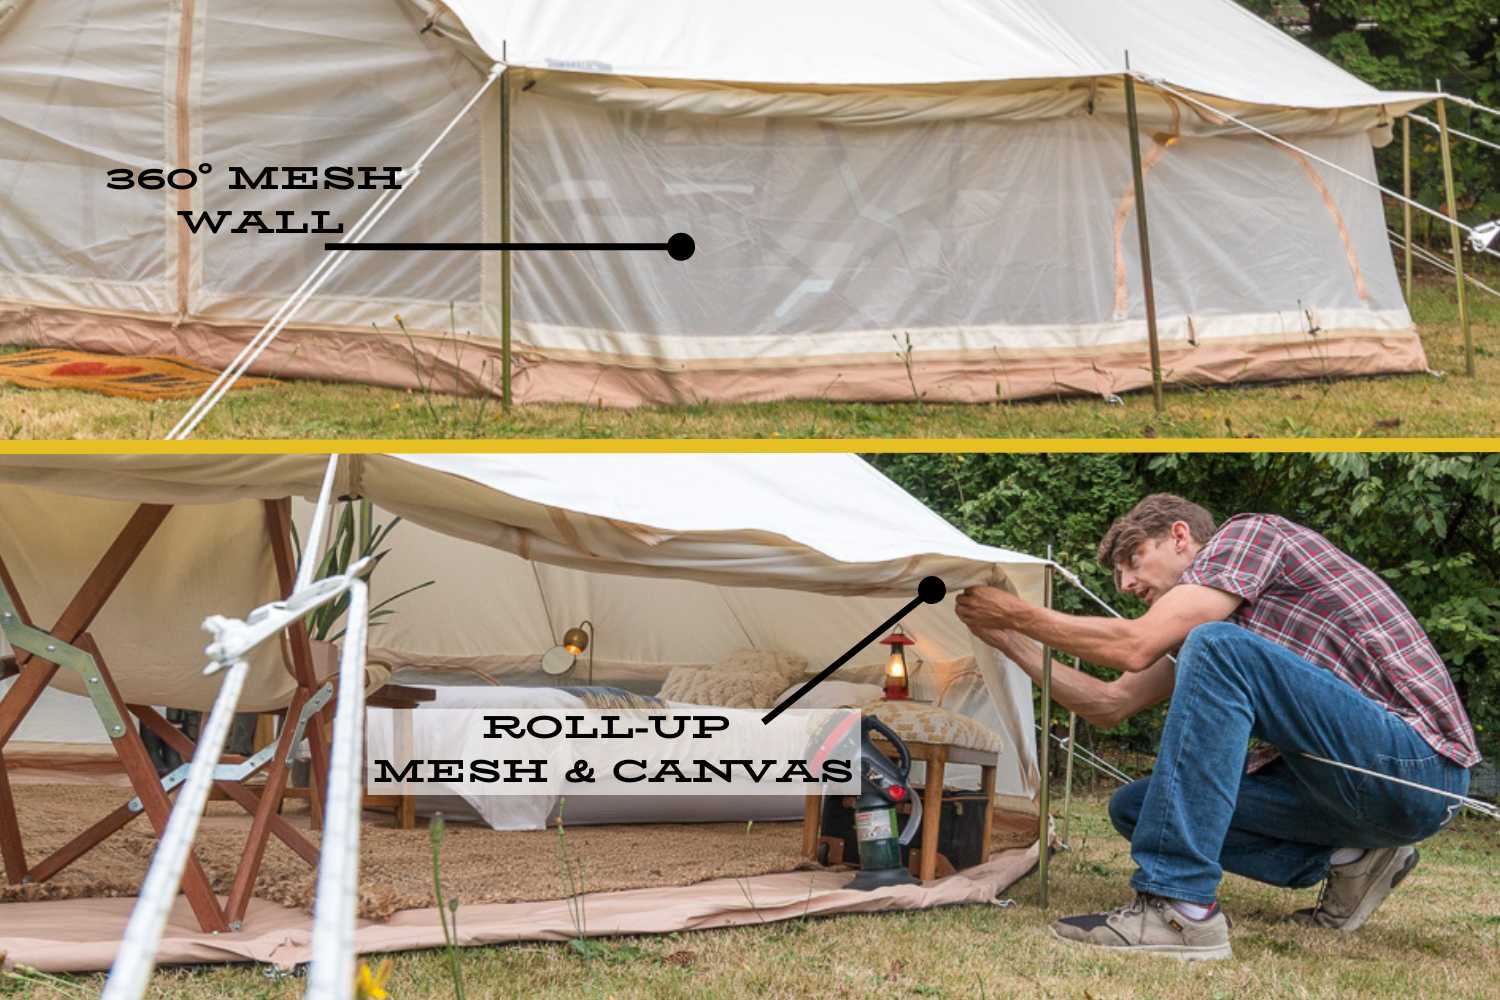 16' (5m) Stella Stargazer Bell Tent | A Skyview Glamping Tent